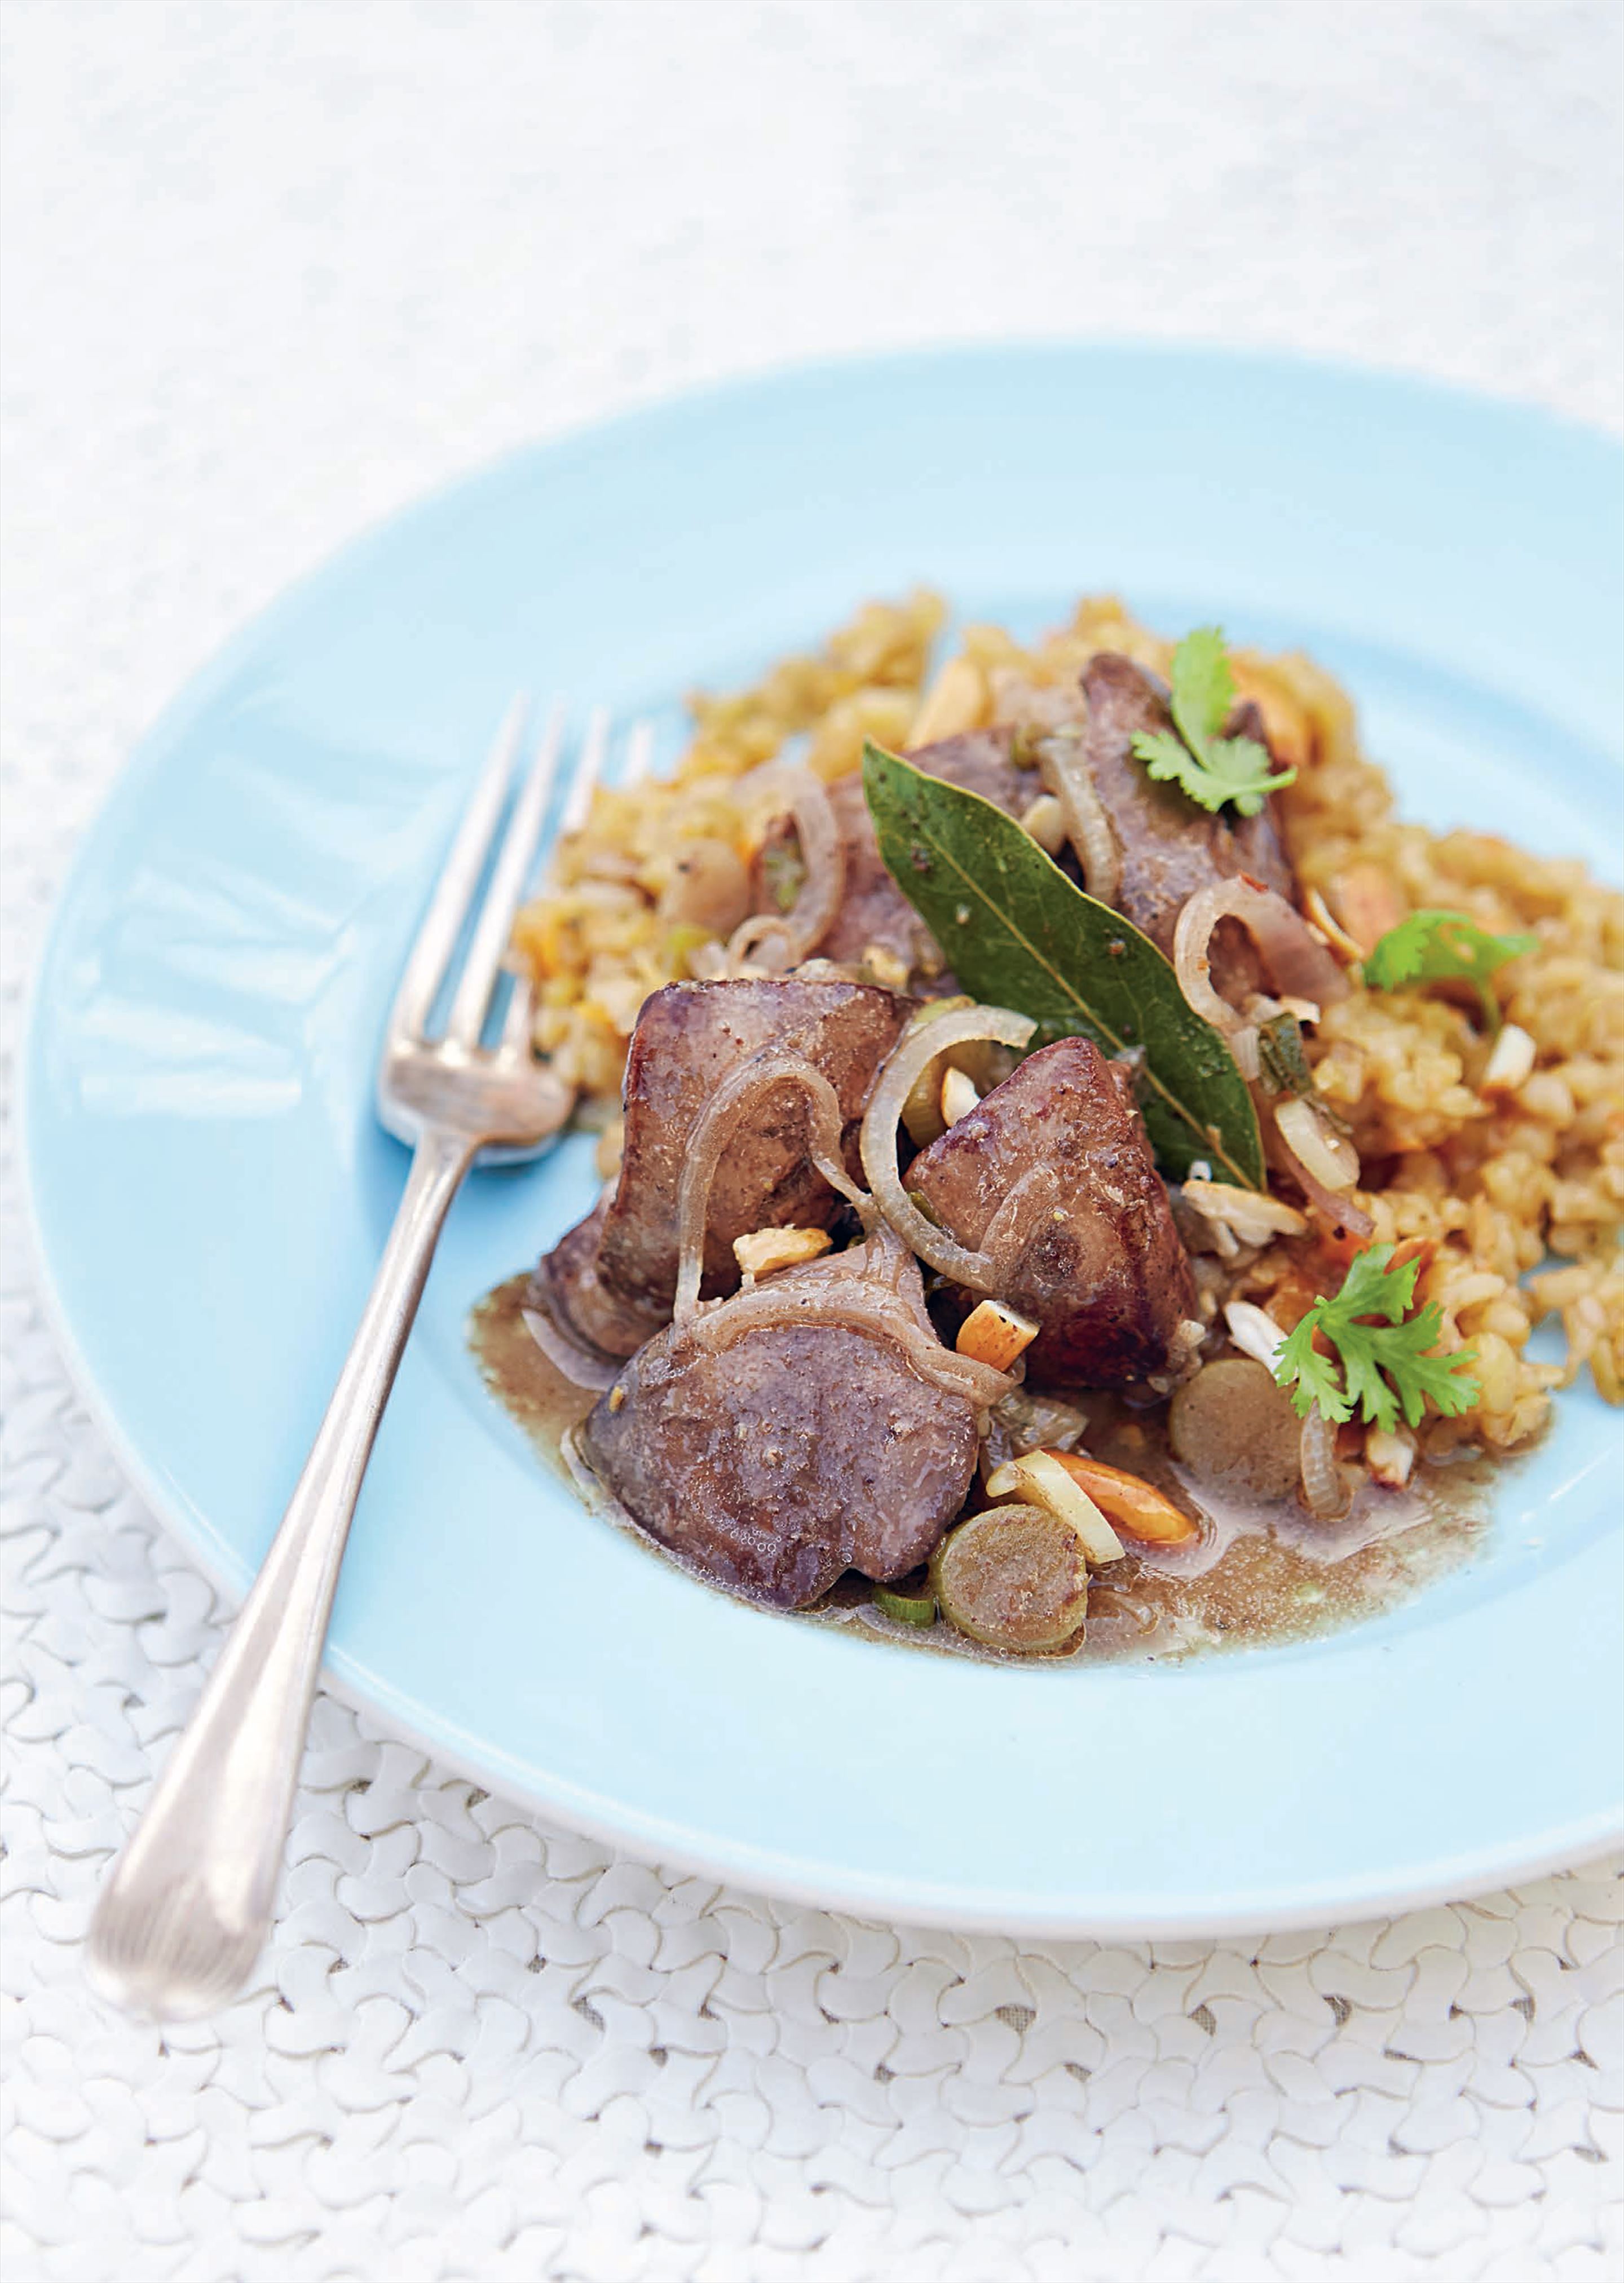 Freekeh with chicken livers